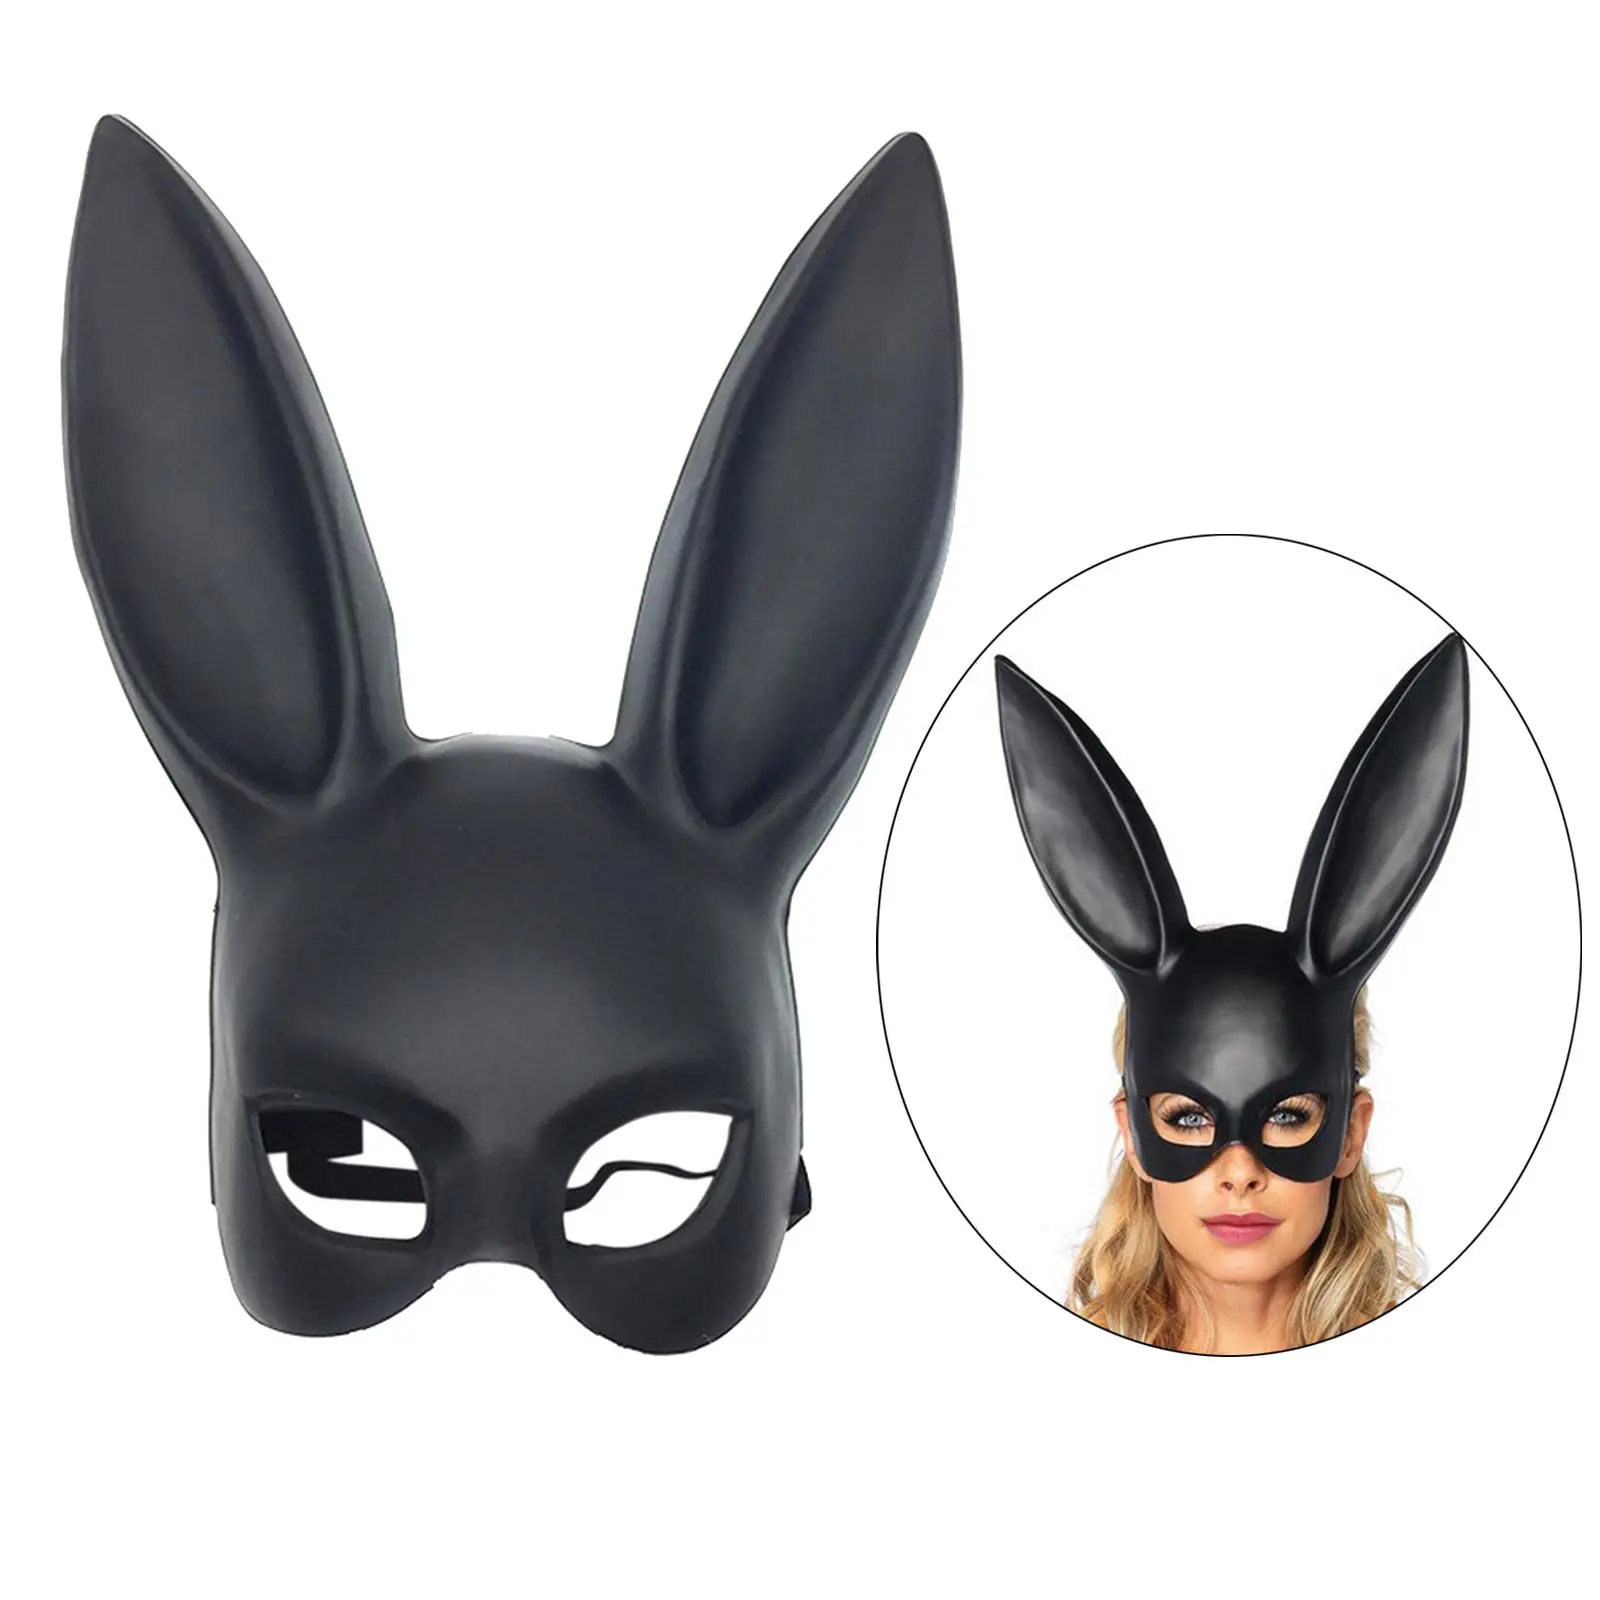 

Adult Women Lady Bunny Ear Rabbit Mask Dress Costume Party Masquerade Easter Theatrical Performance Props Facecover